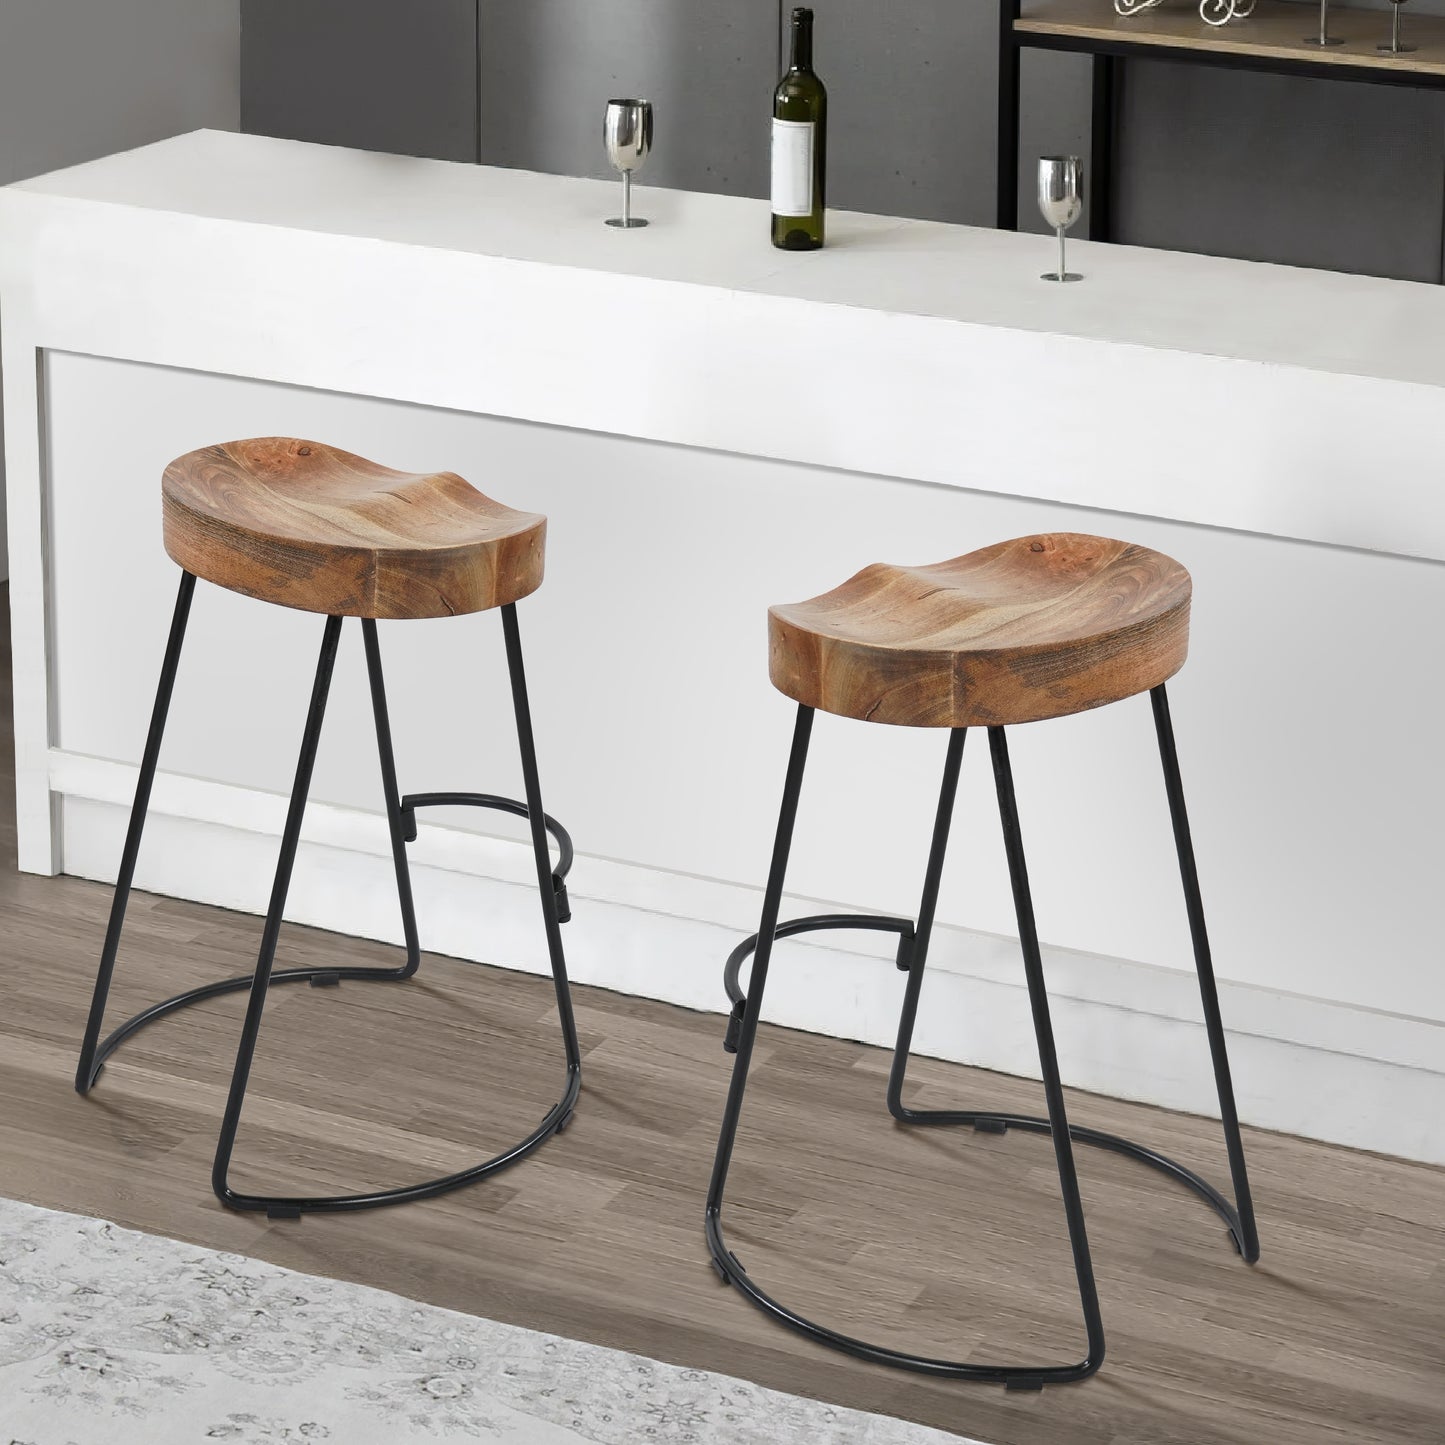 Ela 24 Inch Mango Wood Industrial Counter Height Stool, Saddle Seat, Iron, Set of 2, Brown, Black By The Urban Port